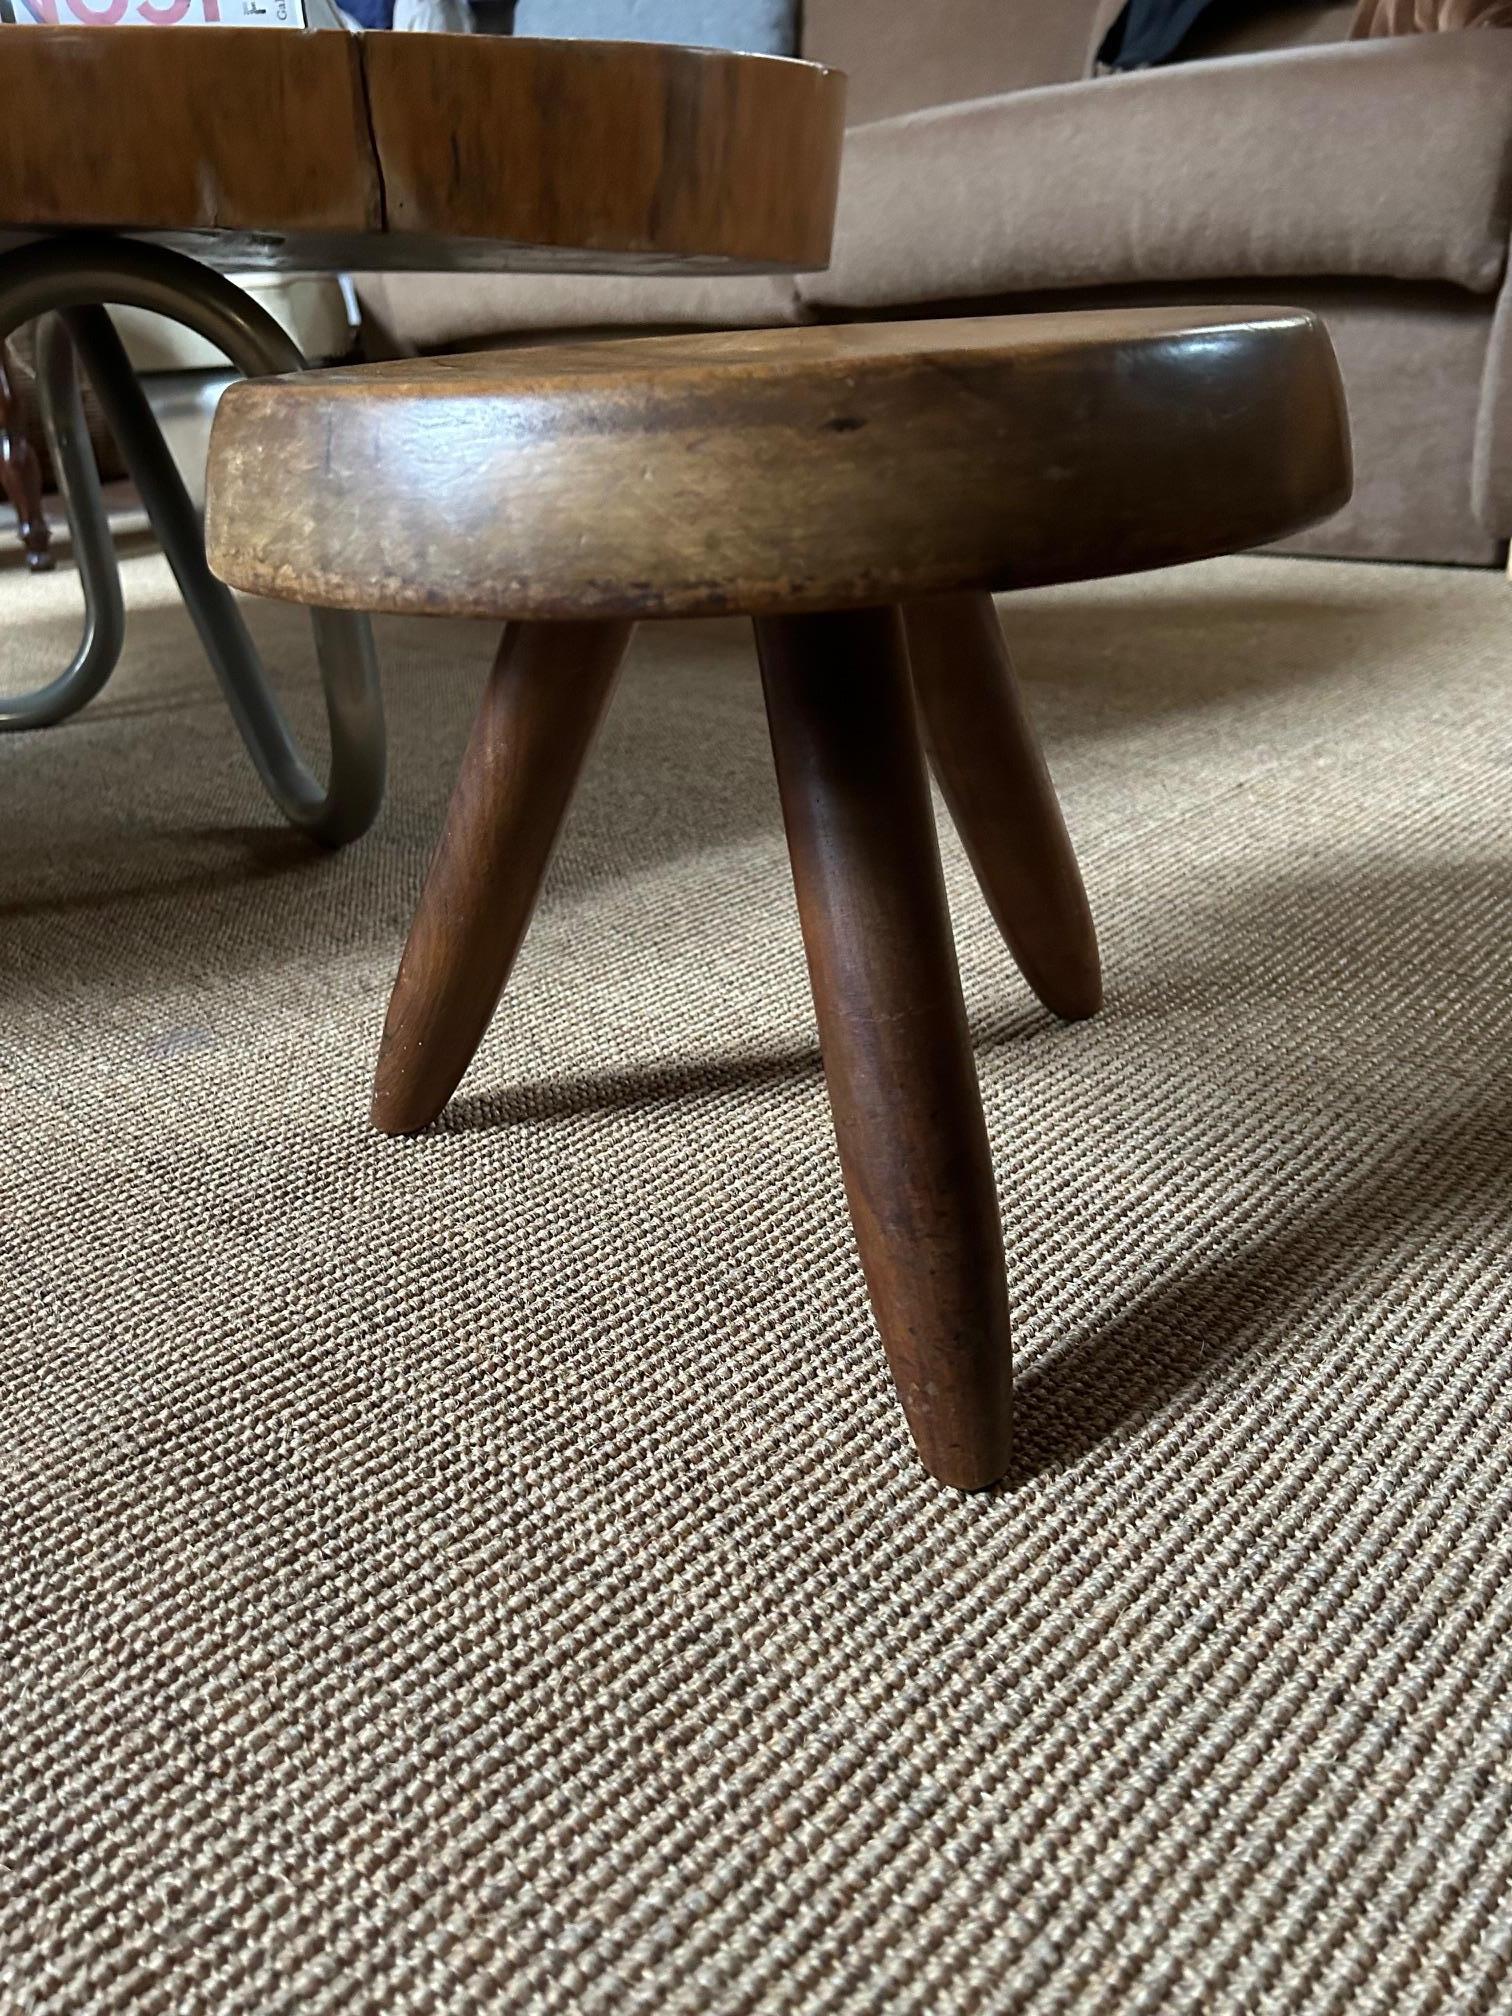 Mahogany Berger stool by Charlotte Perriand For Sale 2